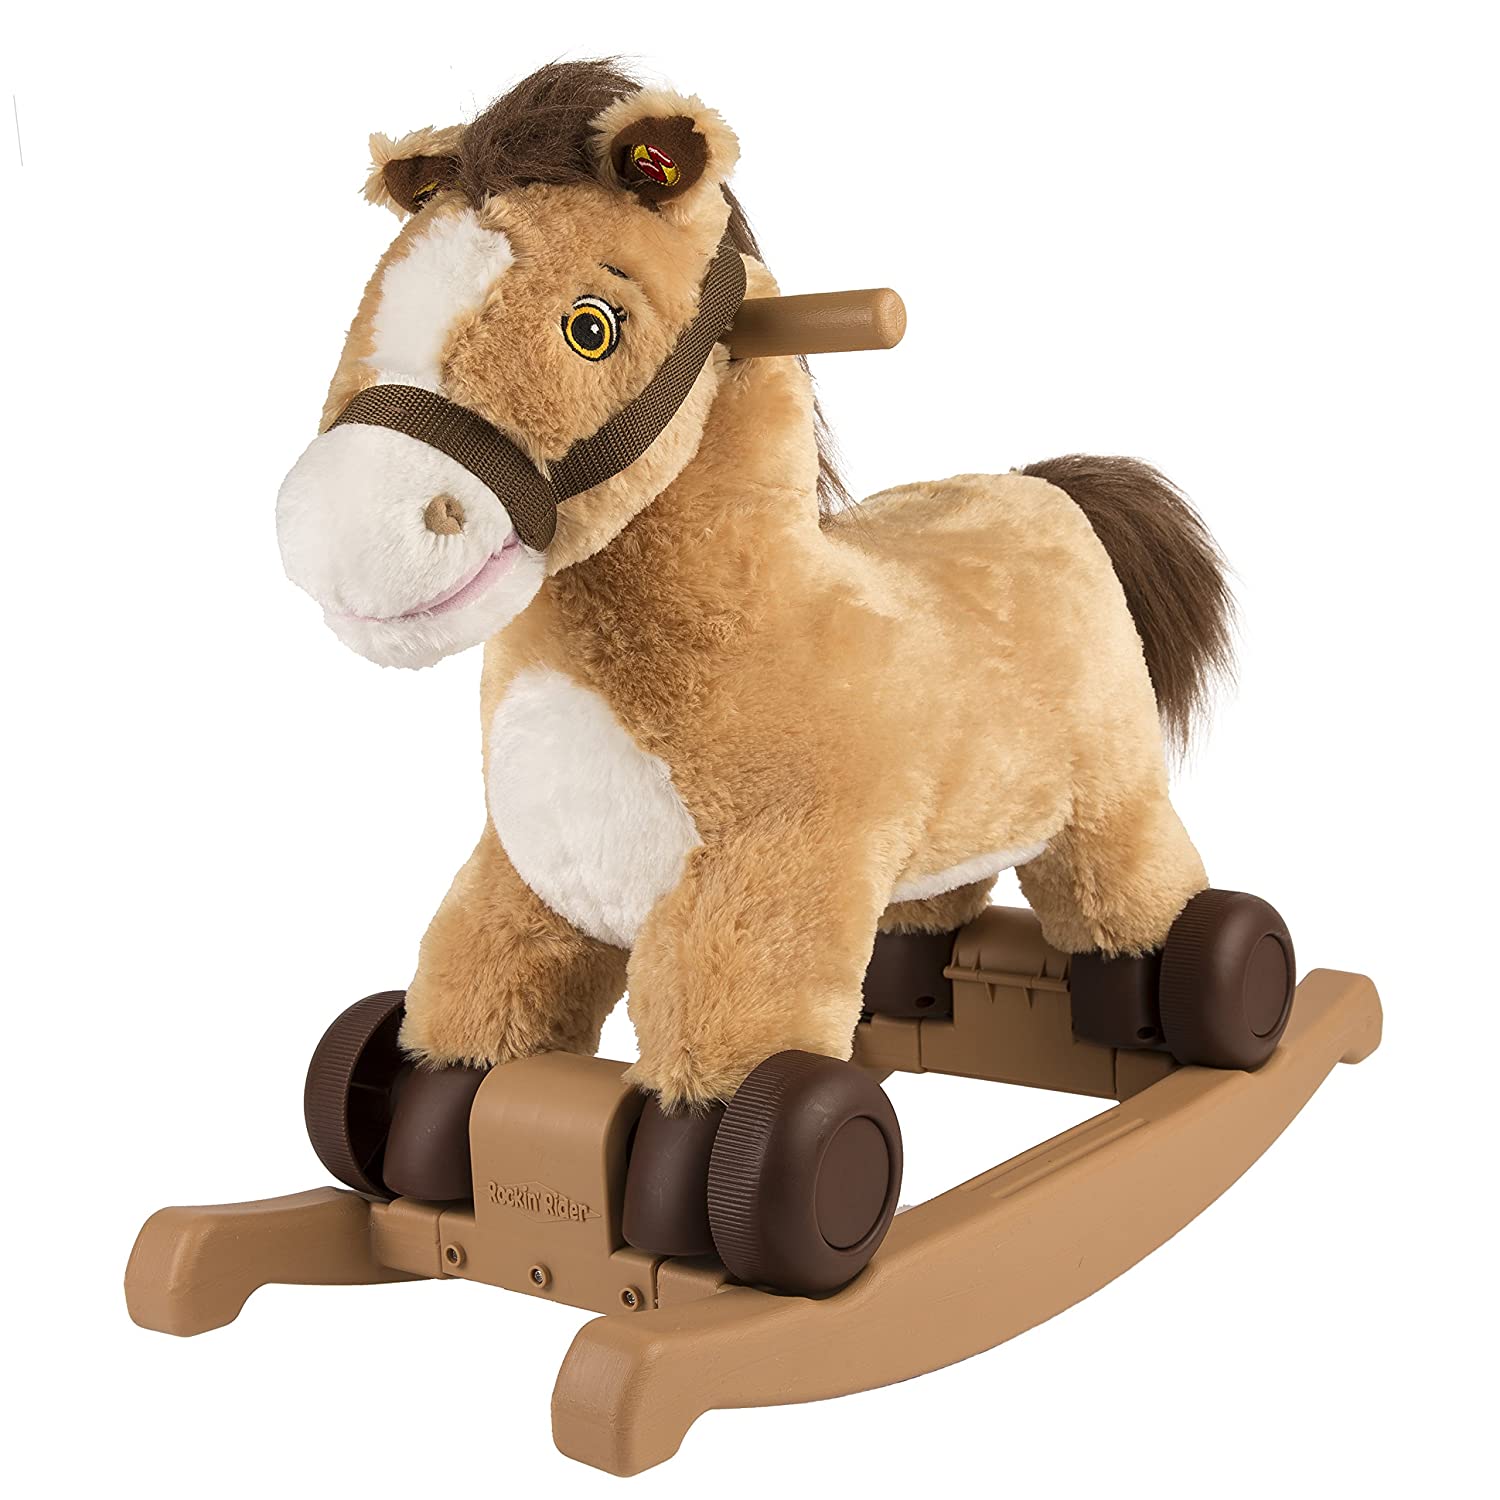 Top 9 Best Rocking Horses Toy Reviews in 2023 1